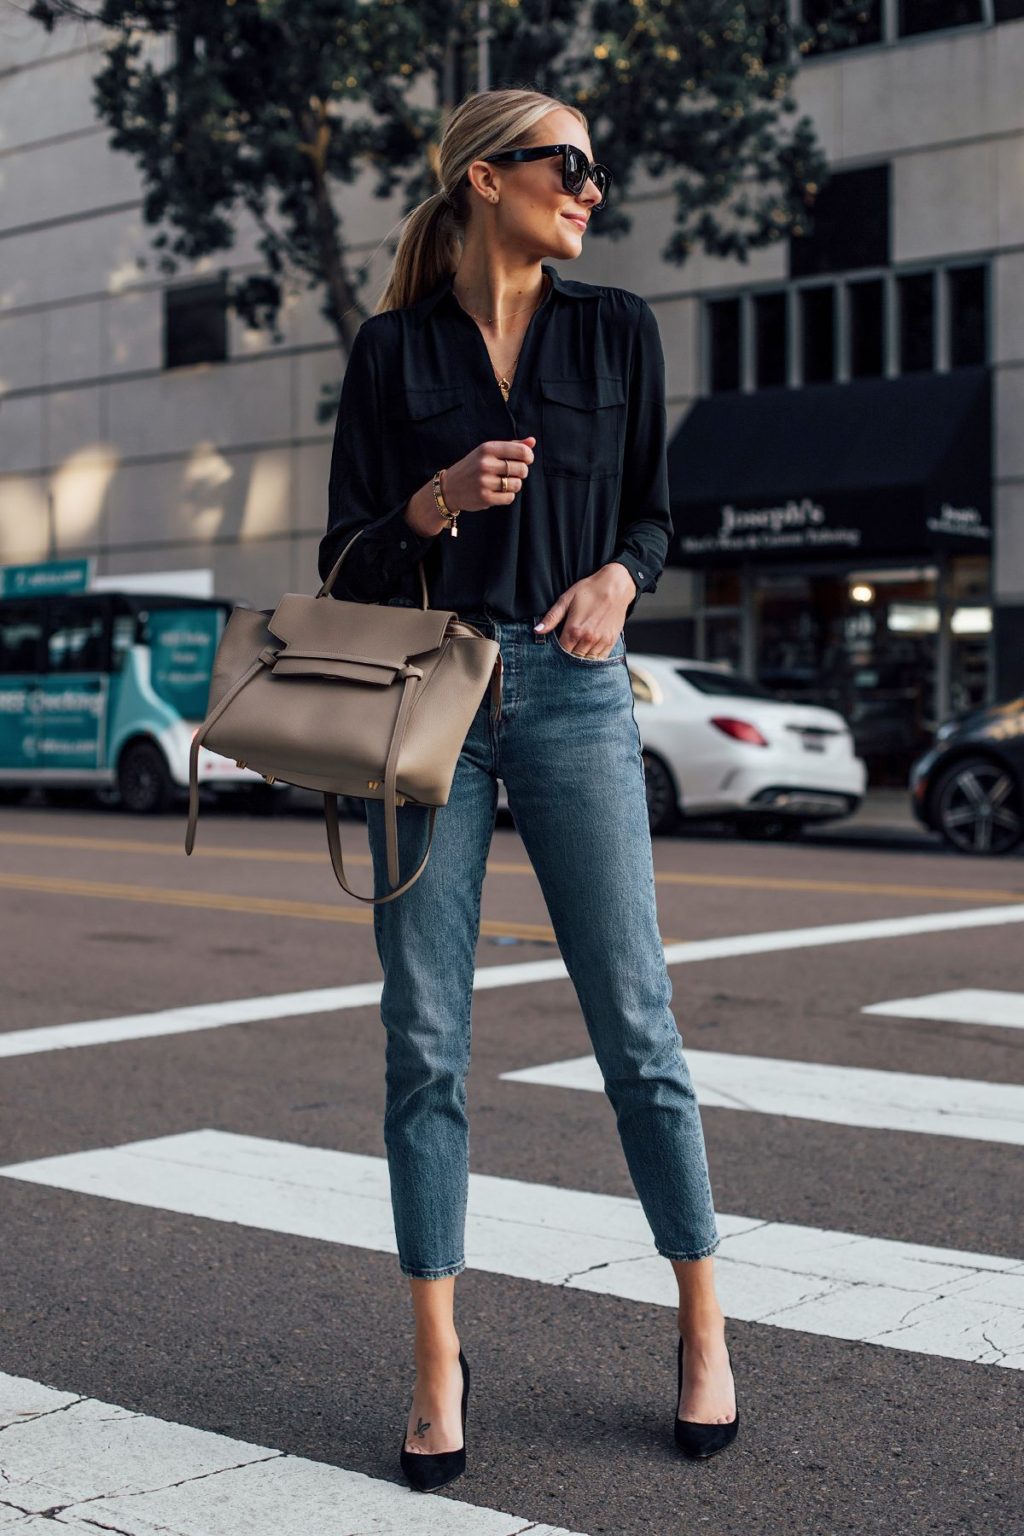 What Women Should Wear For A Business Meeting [60+ Outfit Ideas]